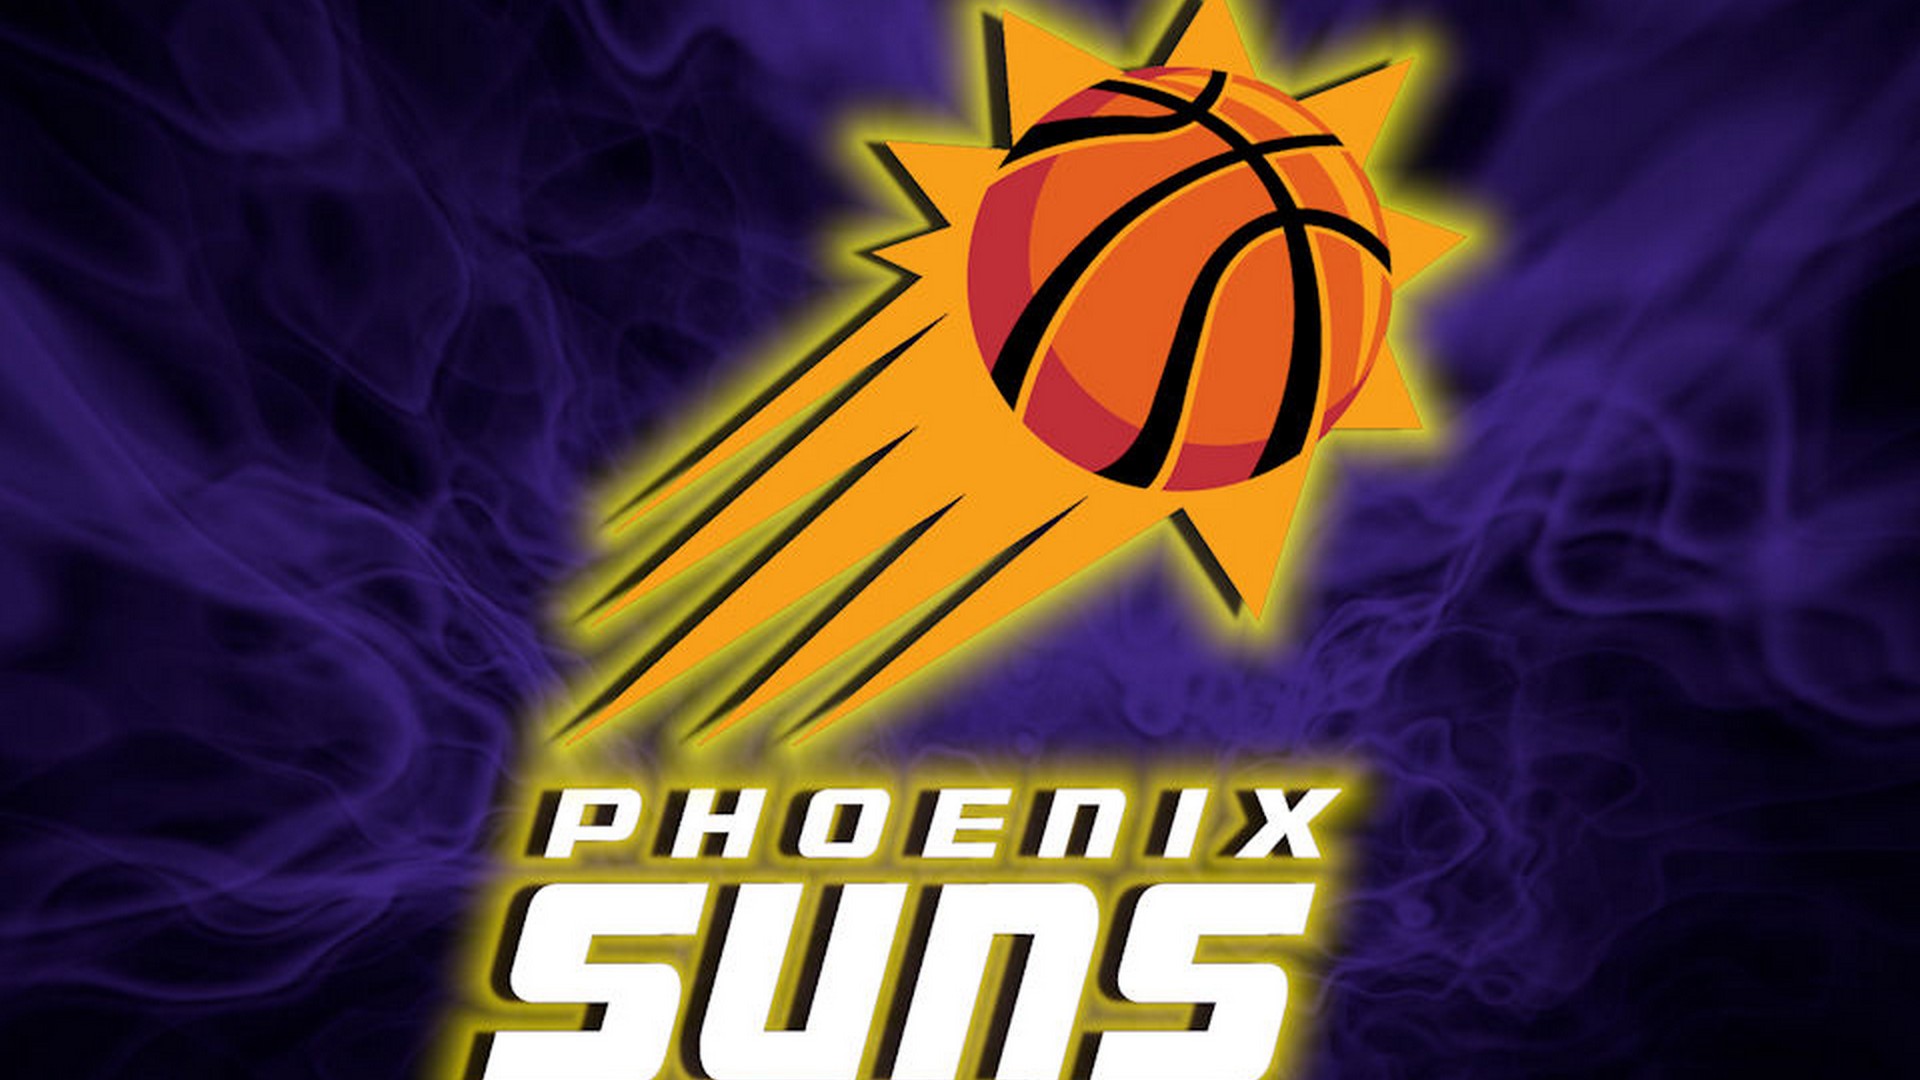 HD Desktop Wallpaper Phoenix Suns with high-resolution 1920x1080 pixel. You can use this wallpaper for your Desktop Computer Backgrounds, Windows or Mac Screensavers, iPhone Lock screen, Tablet or Android and another Mobile Phone device